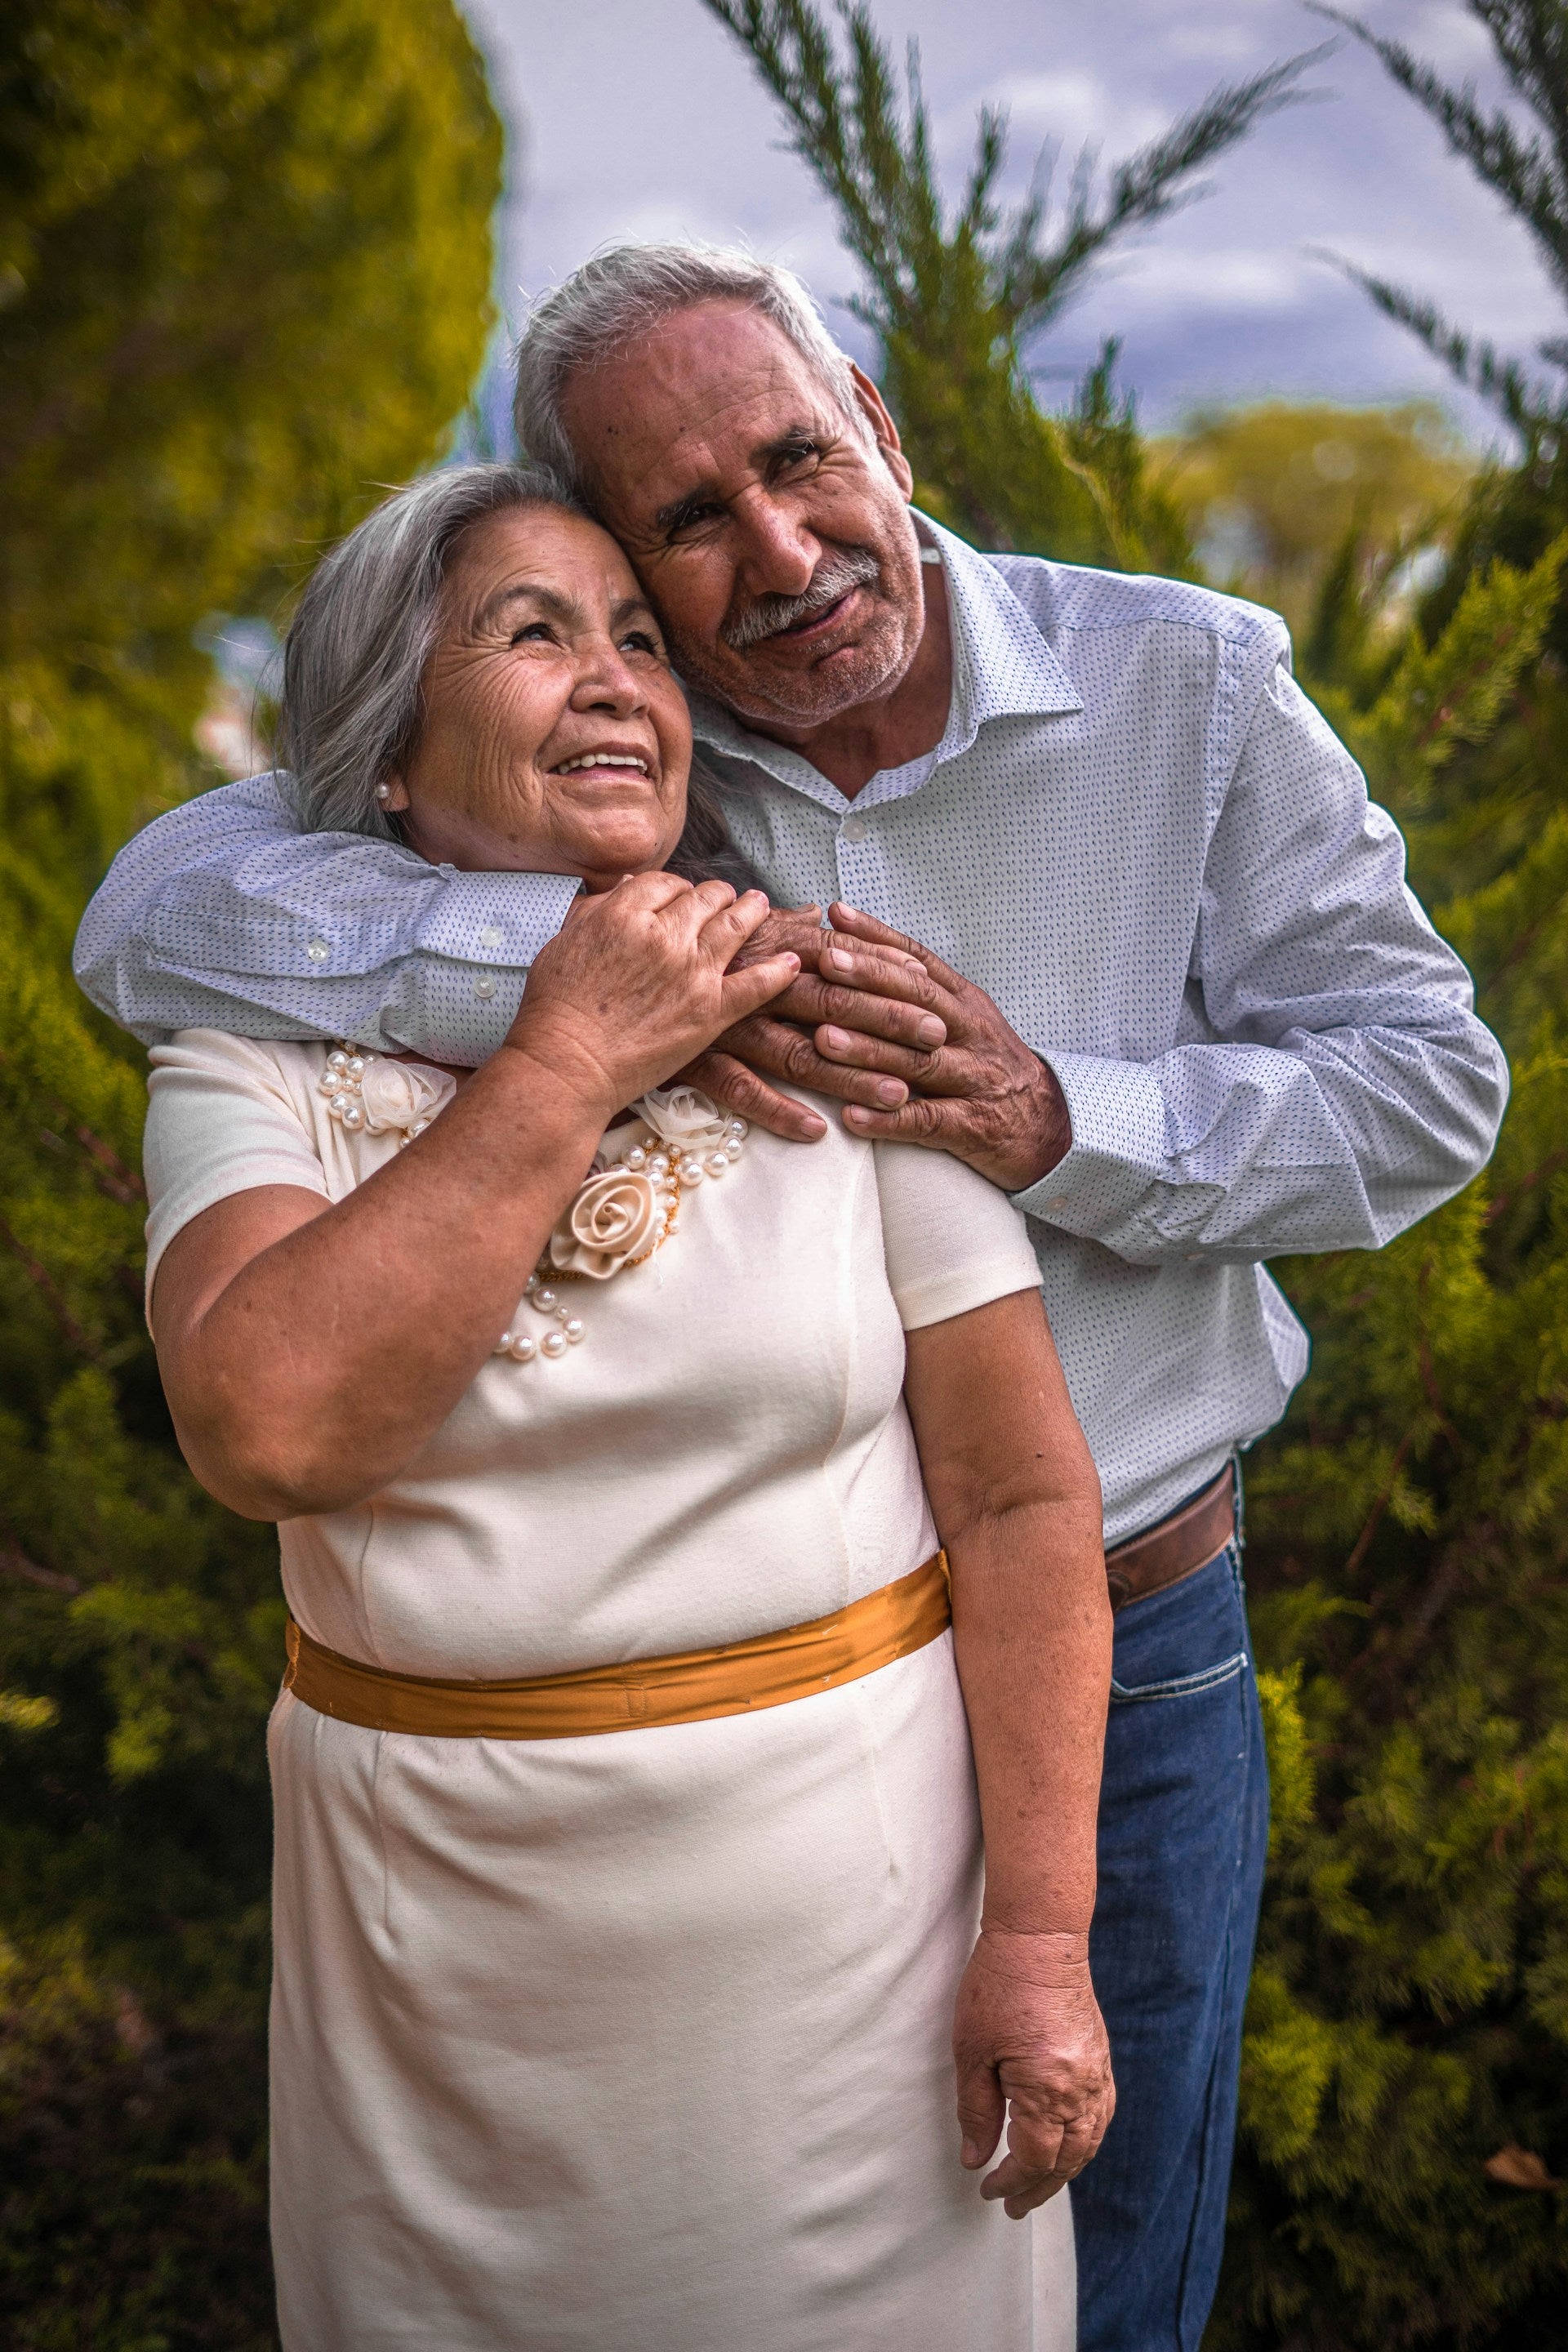 A senior couple holding each other gently while smiling and facing the camera